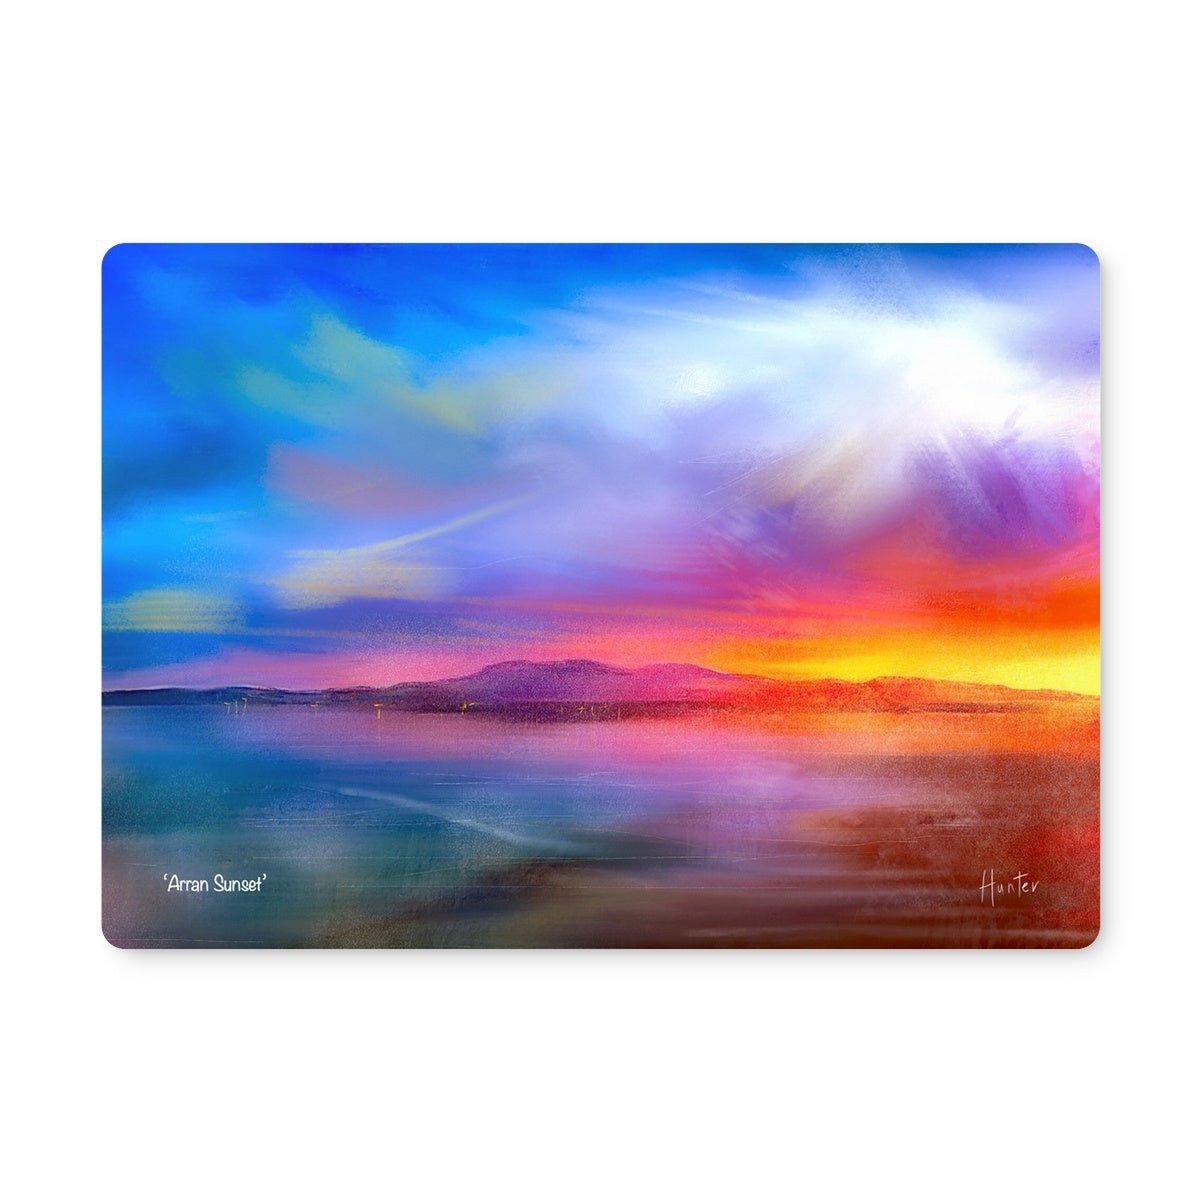 Arran Sunset Art Gifts Placemat-Placemats-Arran Art Gallery-2 Placemats-Paintings, Prints, Homeware, Art Gifts From Scotland By Scottish Artist Kevin Hunter